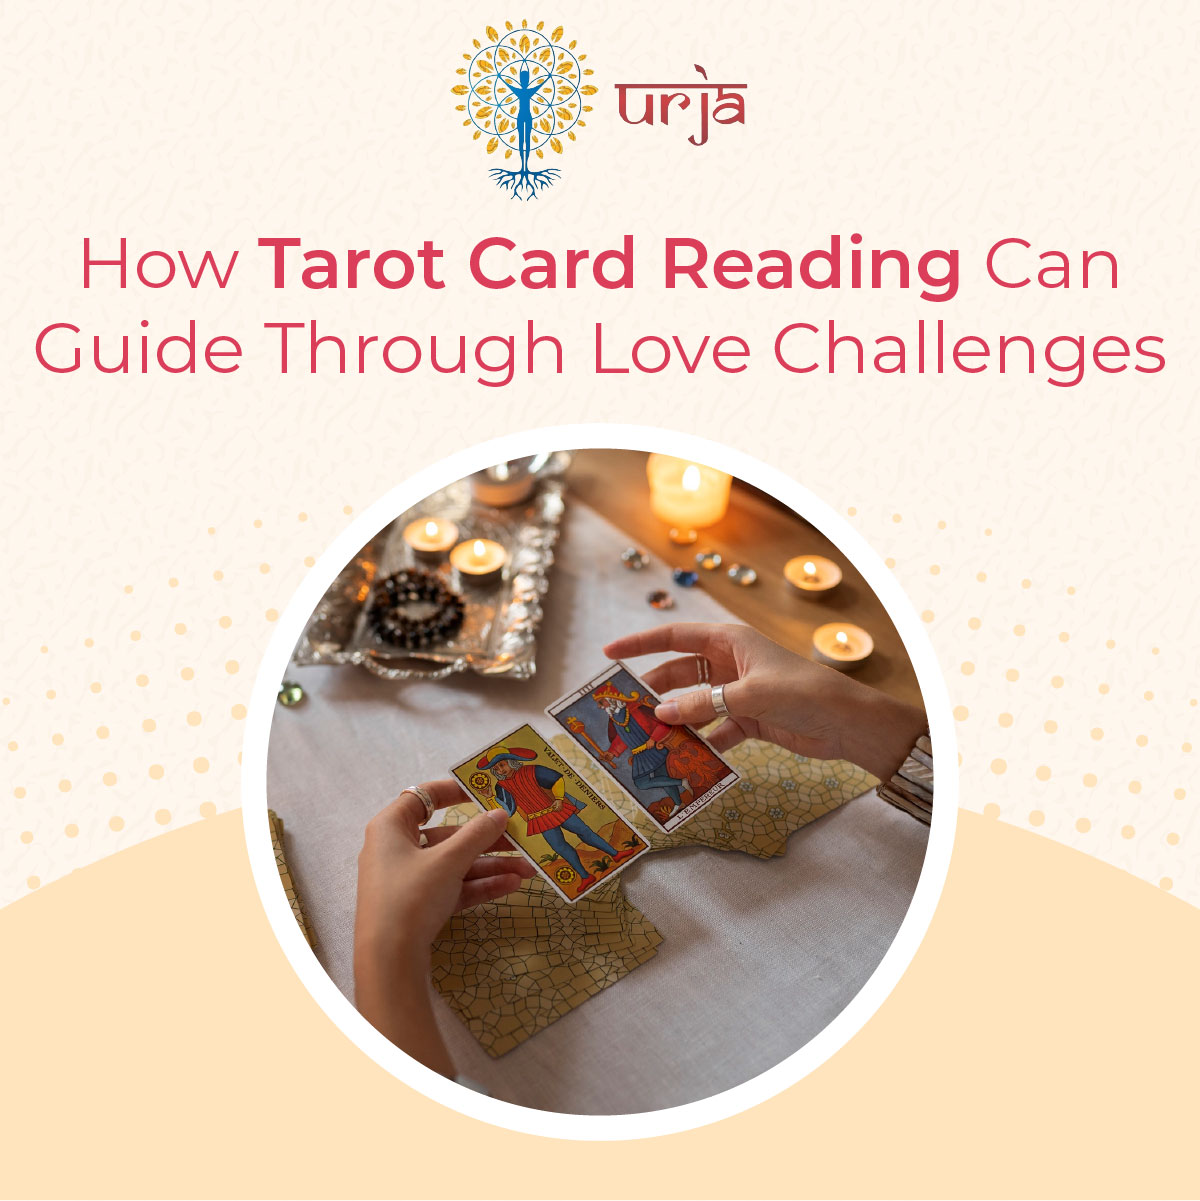 How Tarot Card Reading Can Guide Through Love Challenges?